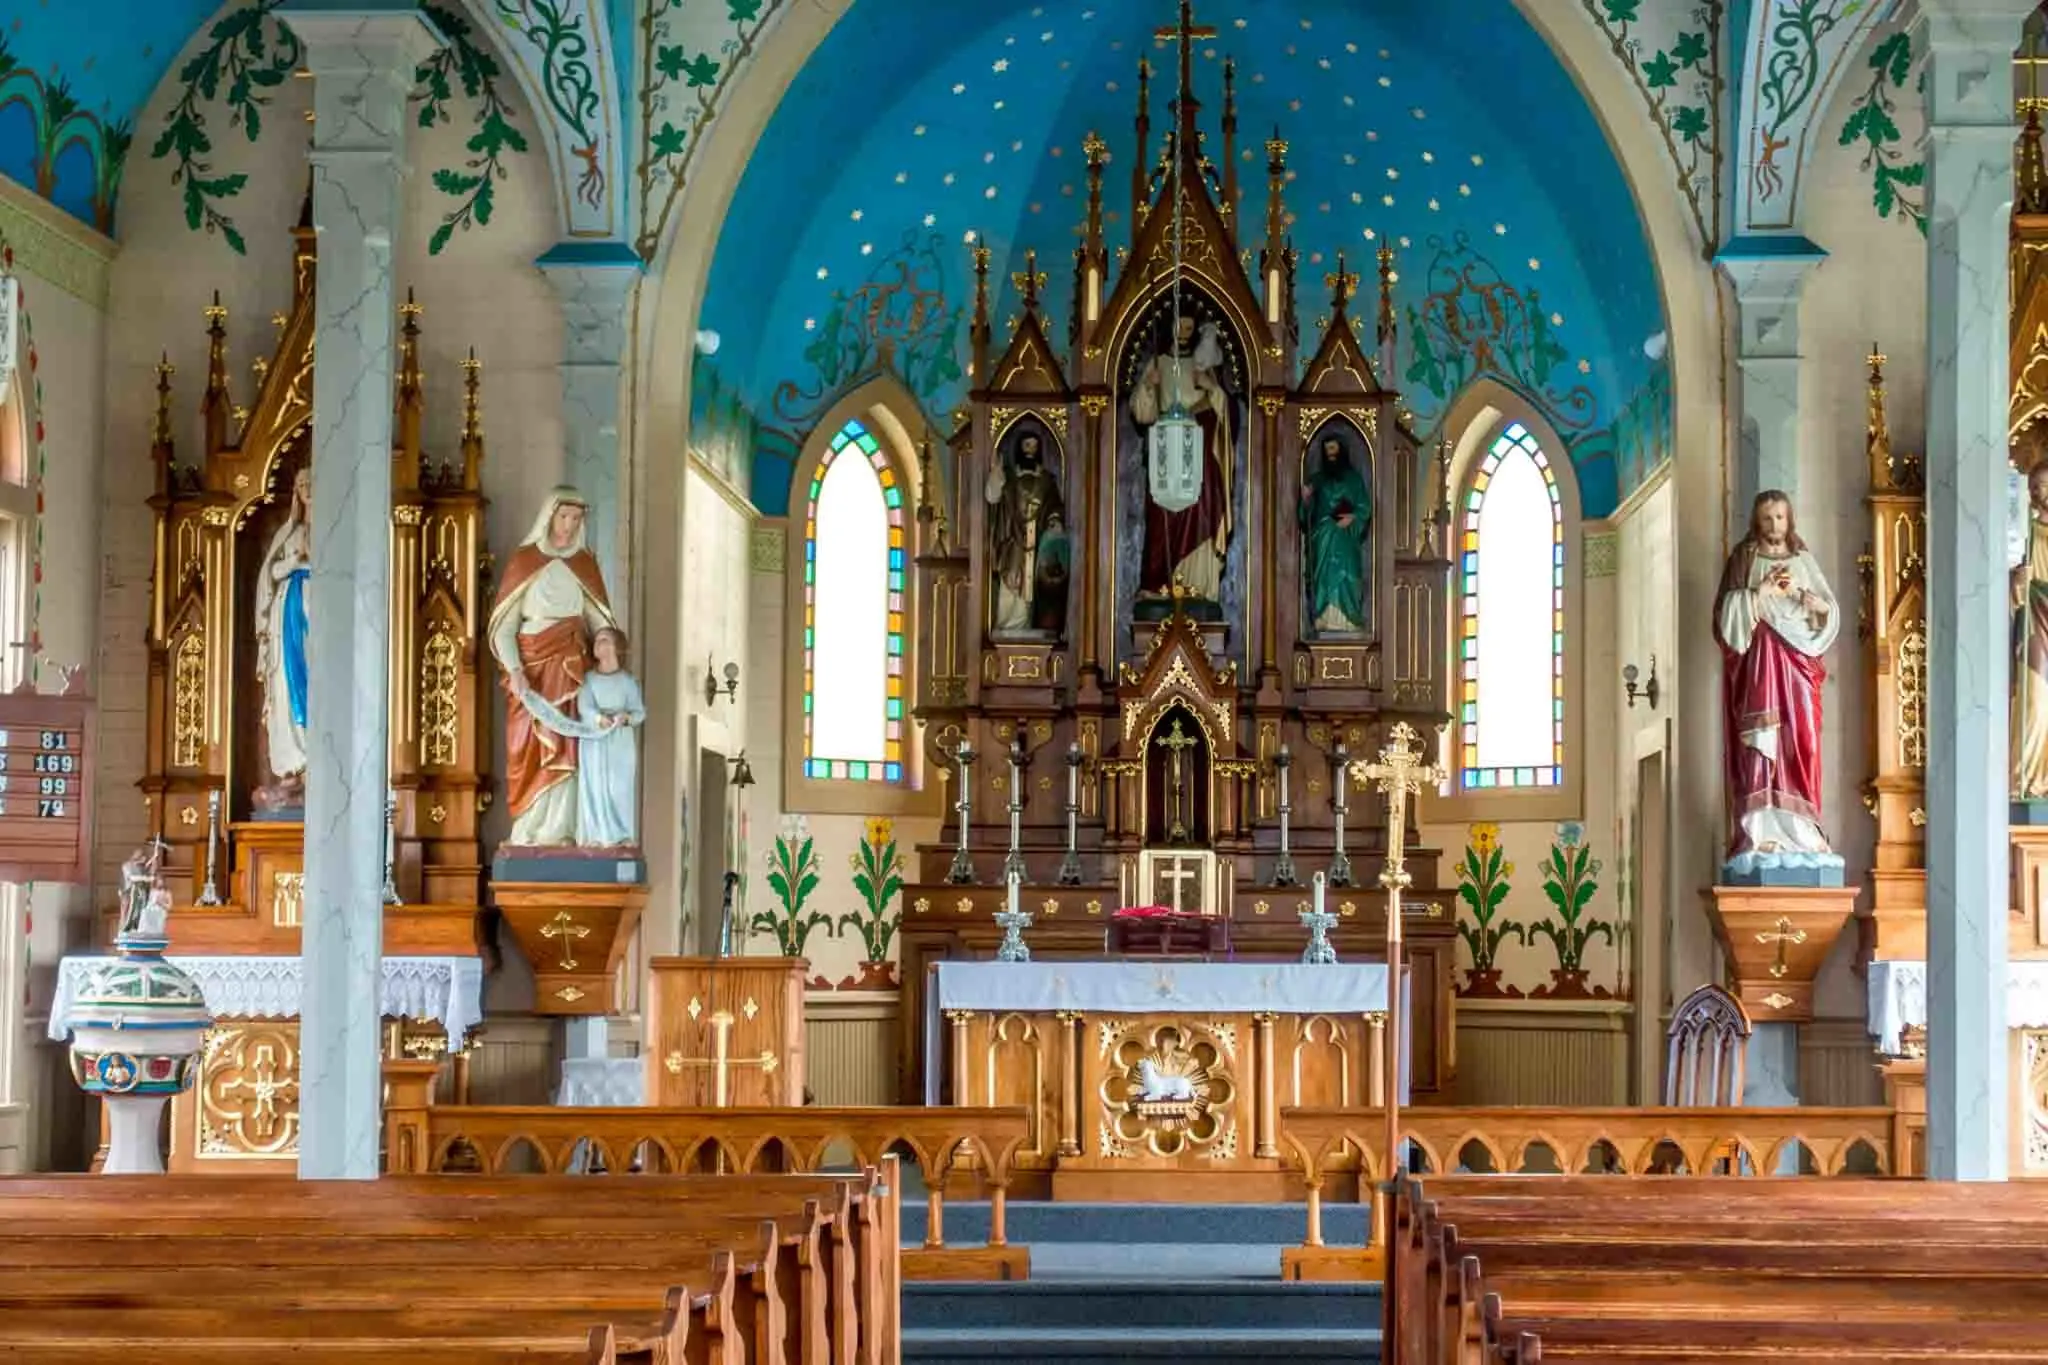 Brightly-painted sanctuary with altar and religious statues